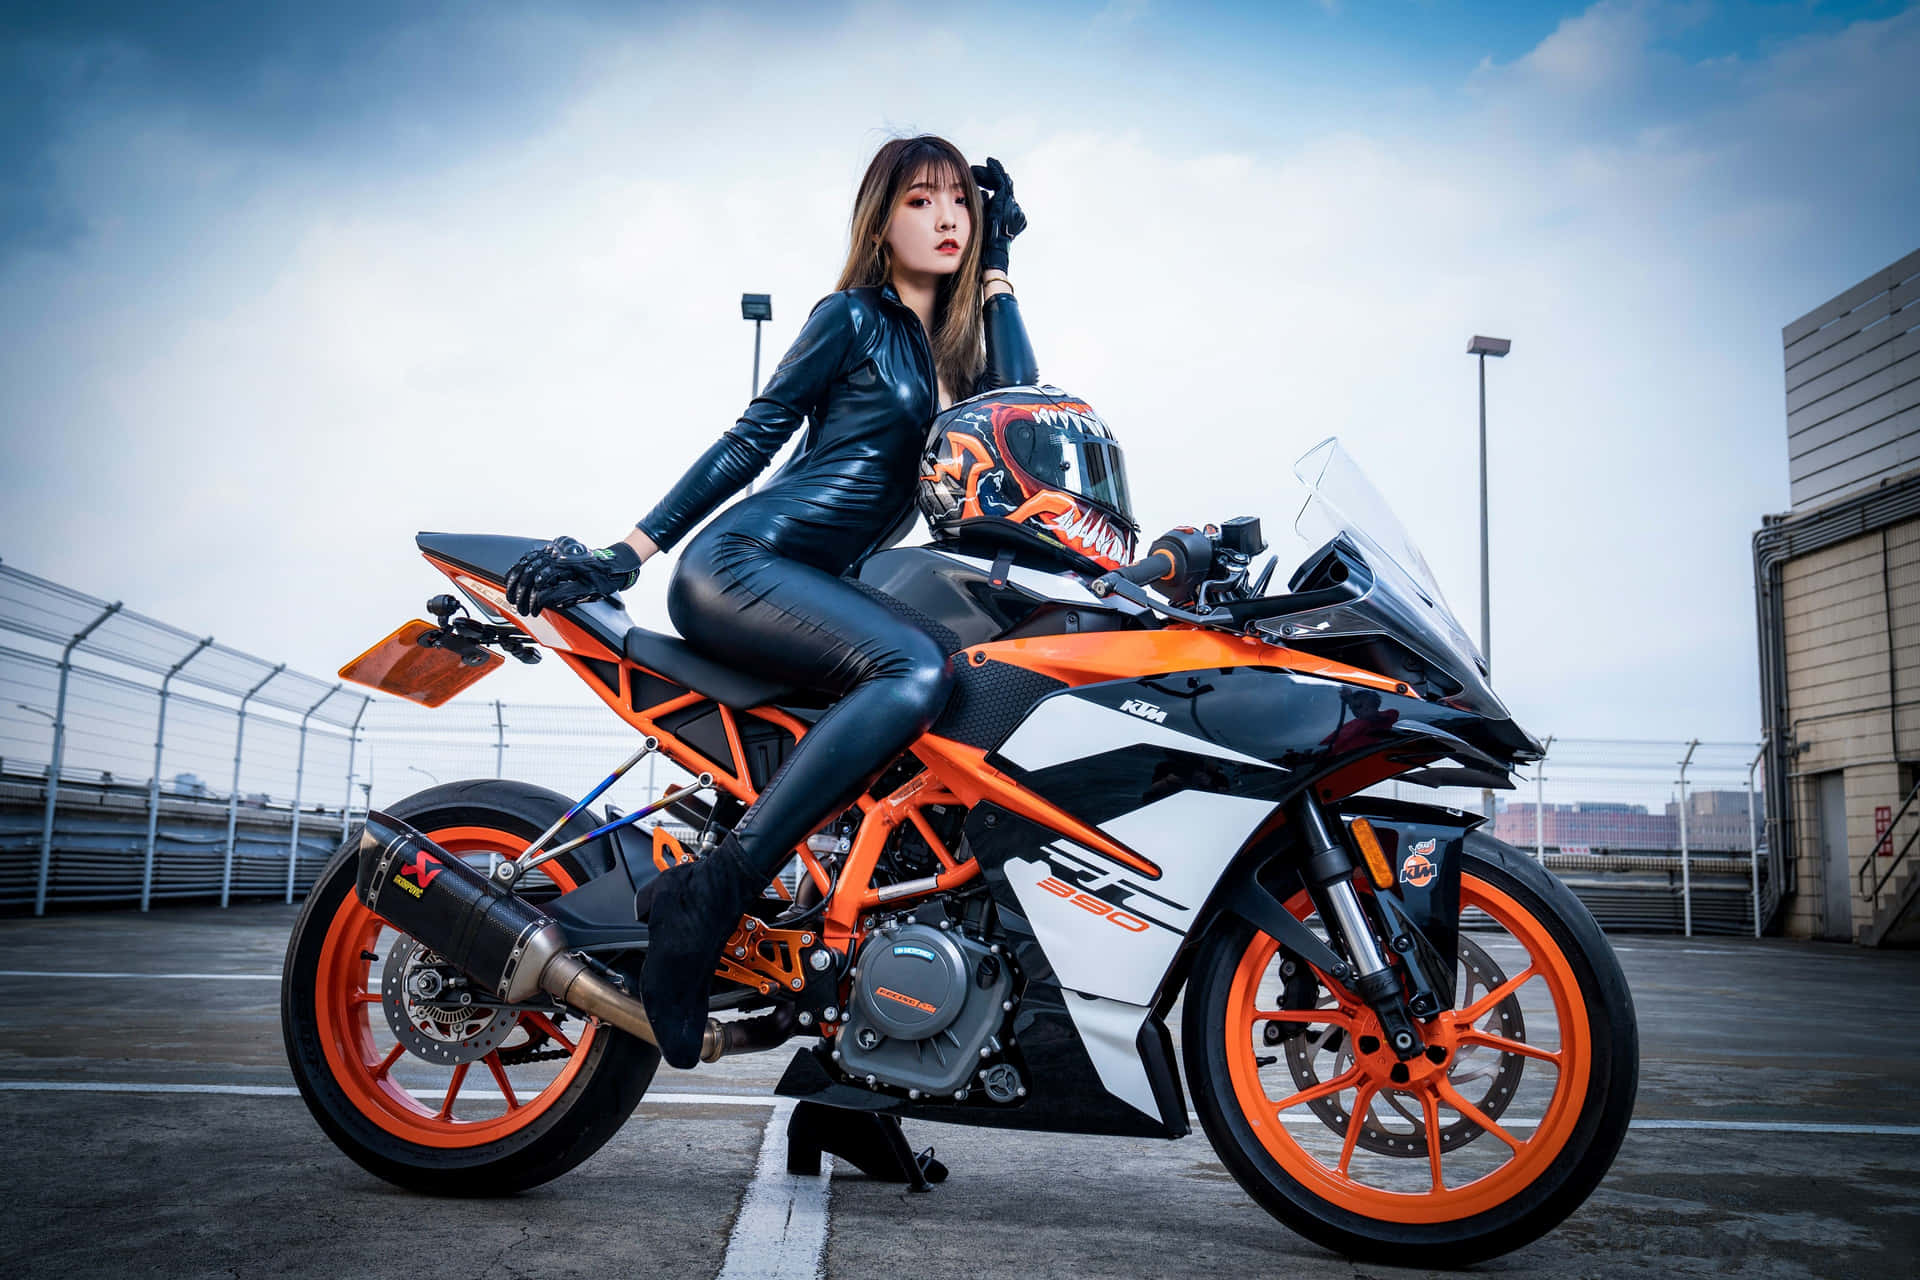 Dynamic Ktm Motorcycle In Action Wallpaper